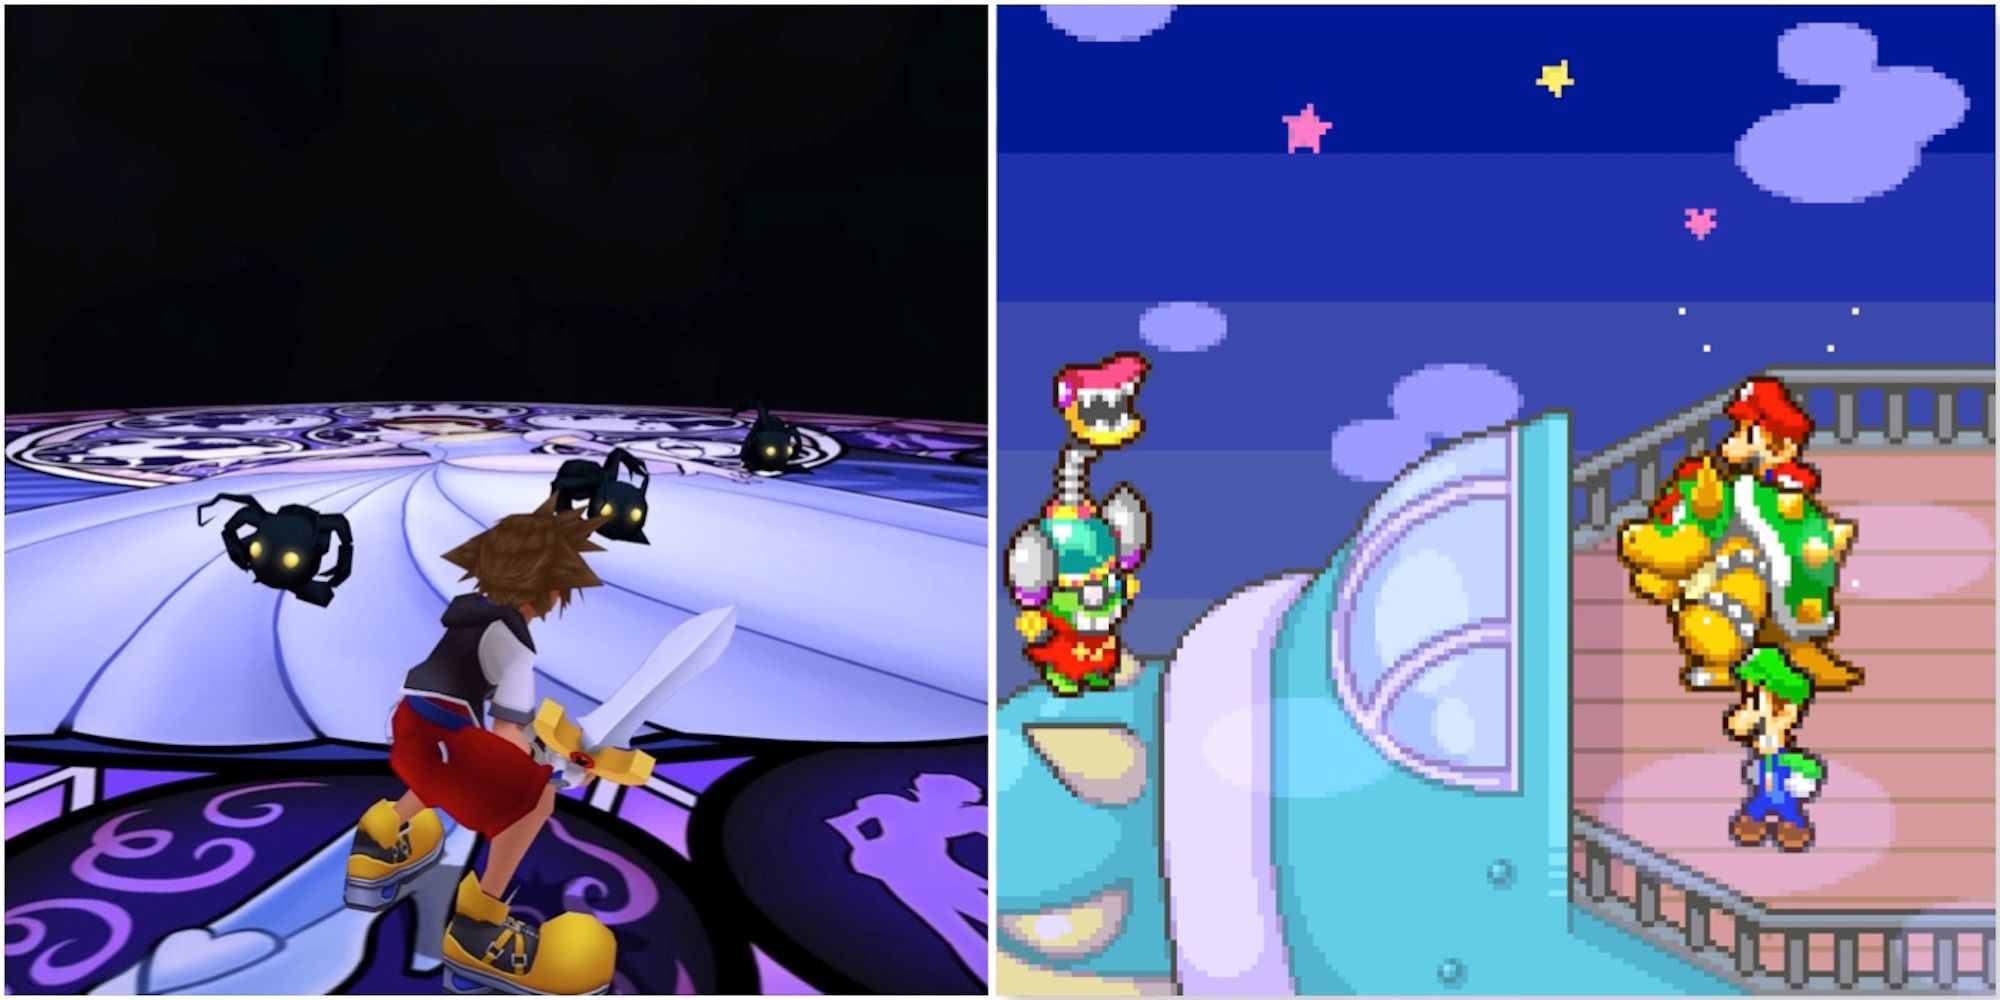 Fighting enemies in Kingdom Hearts and A scene featuring characters in Mario & Luigi Superstar Saga